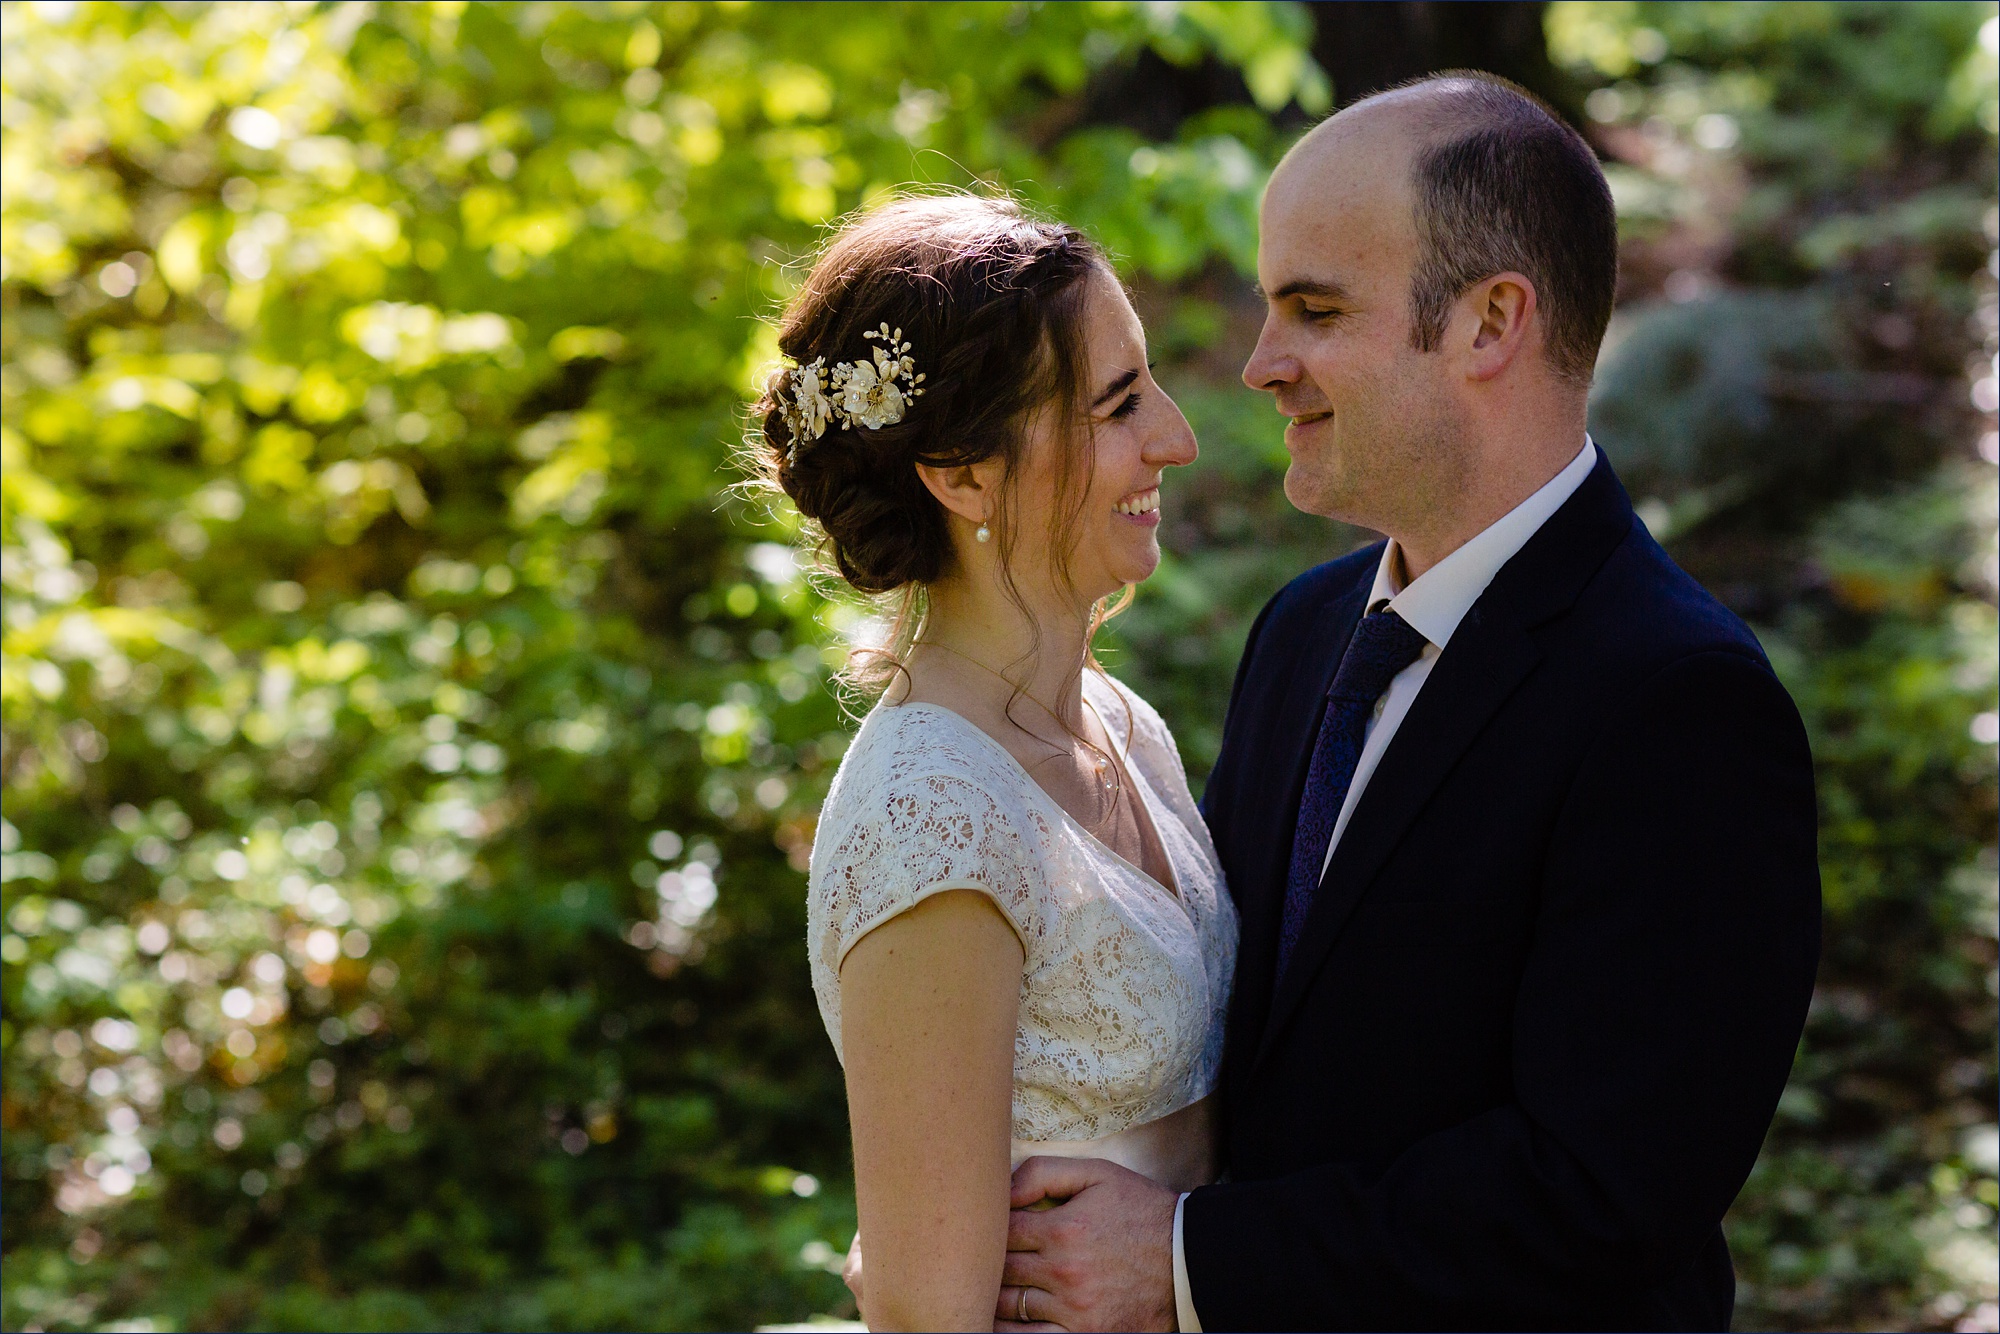 The newlyweds laugh in one other's arms after their White Mountain wedding in NH